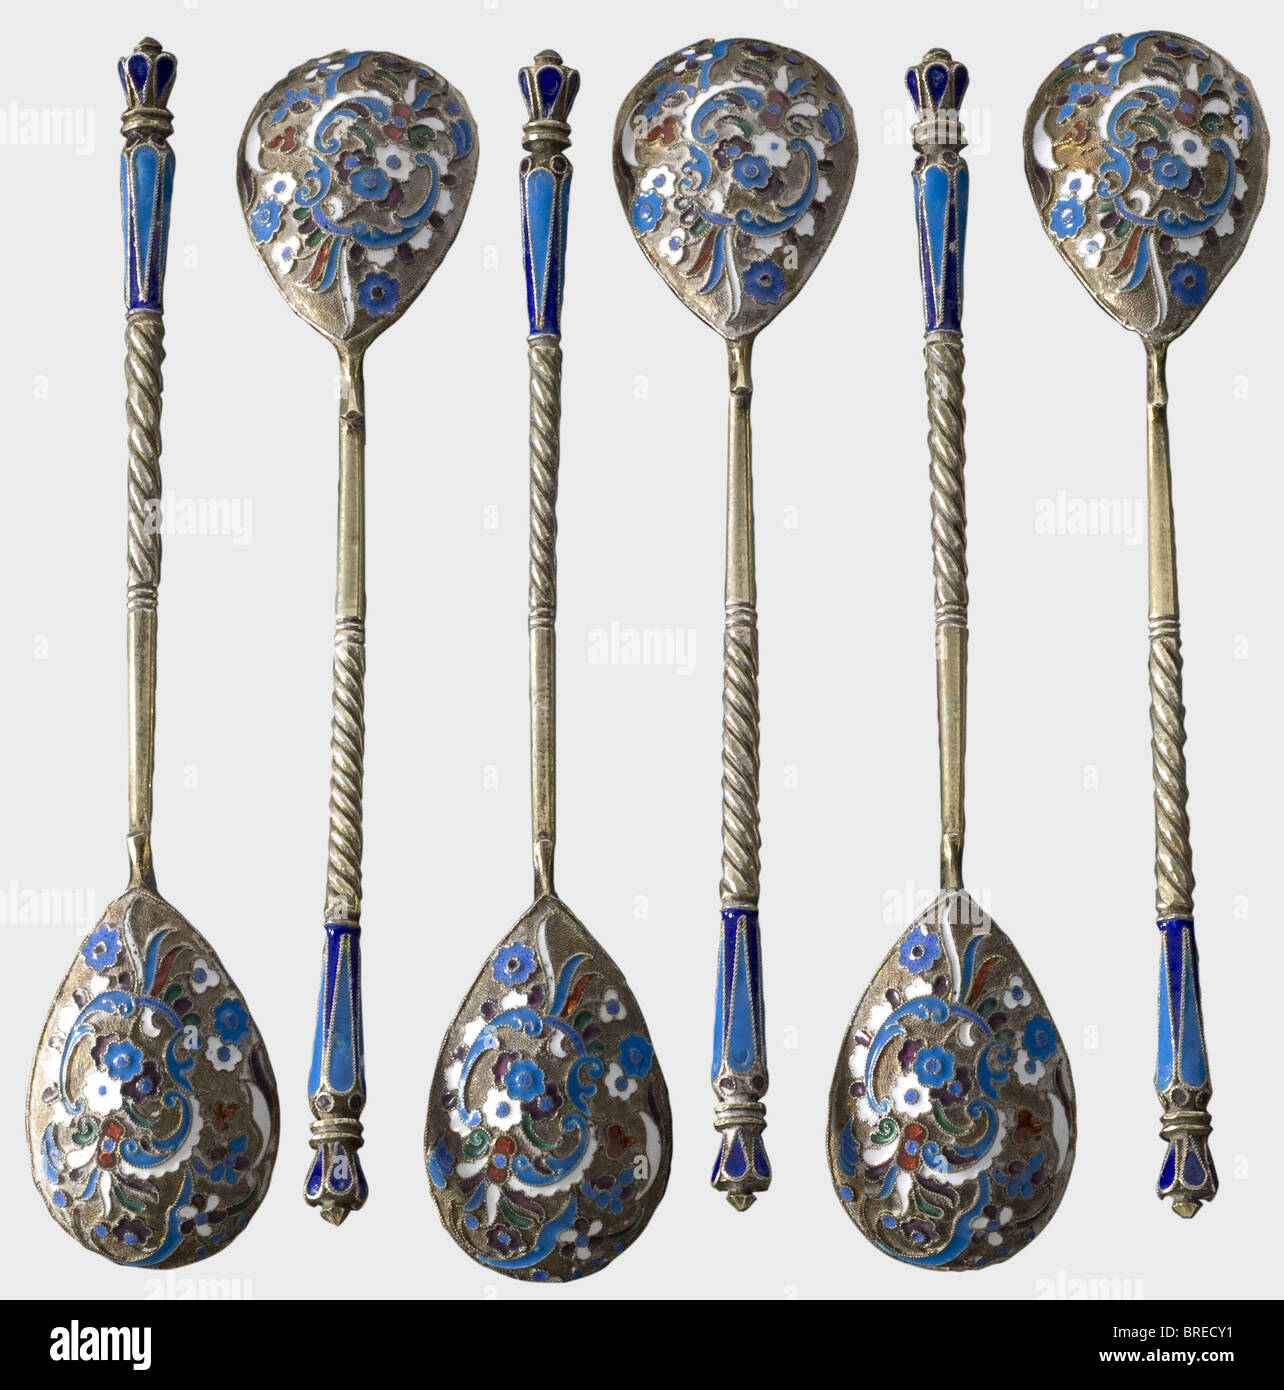 Six cloisonné spoons, circa 1910. Gilt silver, with enamel floral designs. The interior of the bowls bear the Cyrillic master's mark 'MZ' and the hallmark '84'. Length of each 14.3 cm. Total weight 156 g. Provenance: Grand Duchess Vera Konstantinovna Romanova (1854 - 1912). historic, historical, 1910s, 20th century, fine arts, art, art object, art objects, artful, precious, collectible, collector's item, collectibles, collector's items, rarity, rarities, cutlery, sets of cutlery, spoon, spoons, Stock Photo